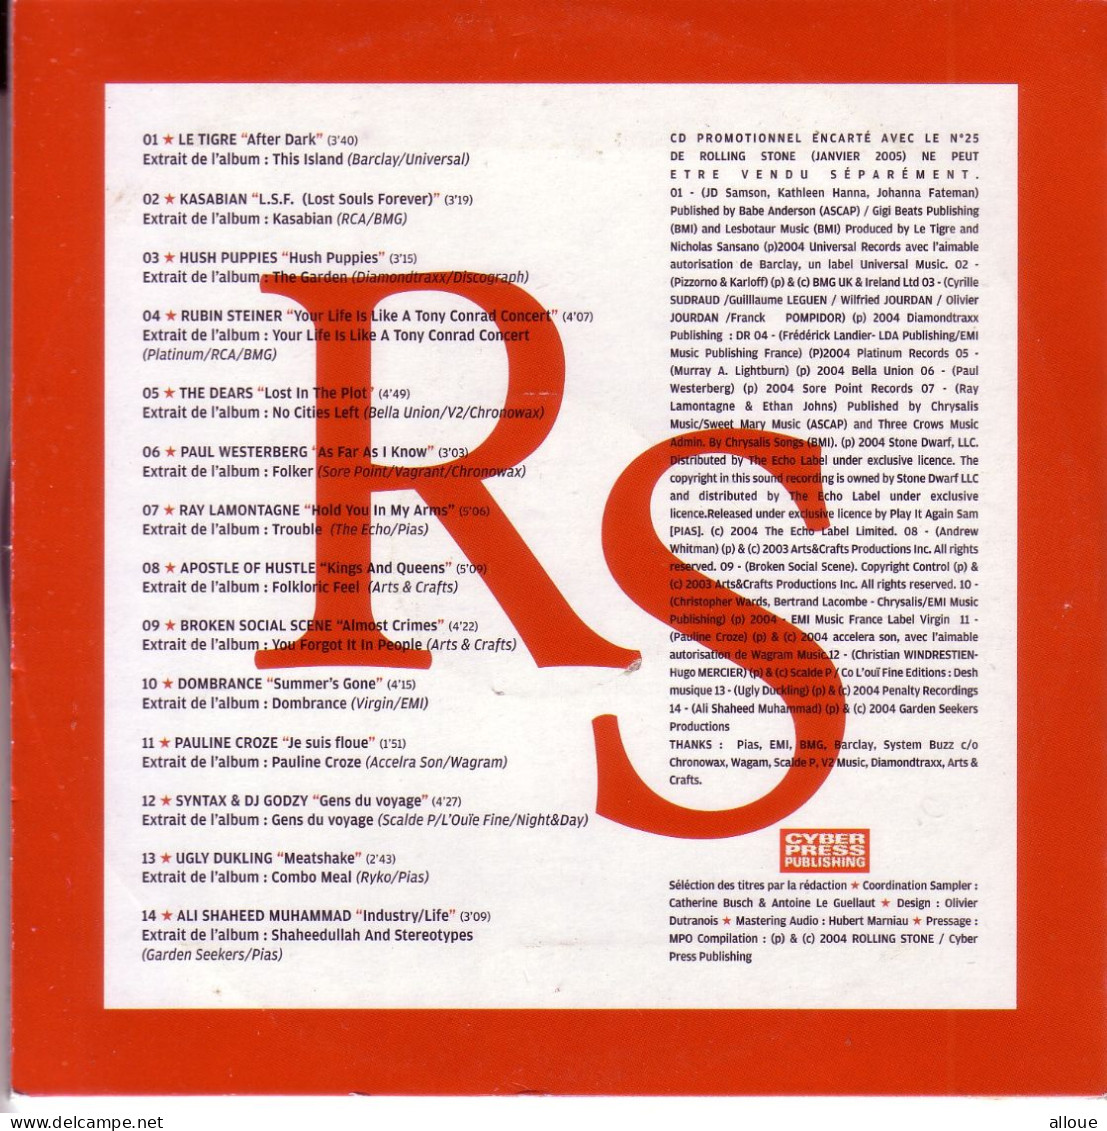 RS SAMPLER - CD ROLLING STONE MAGAZINE - POCHETTE CARTON 14 TRACKS - LE TIGRE, KASABIAN, HUSH PUPPIES AND MORE - Autres - Musique Anglaise